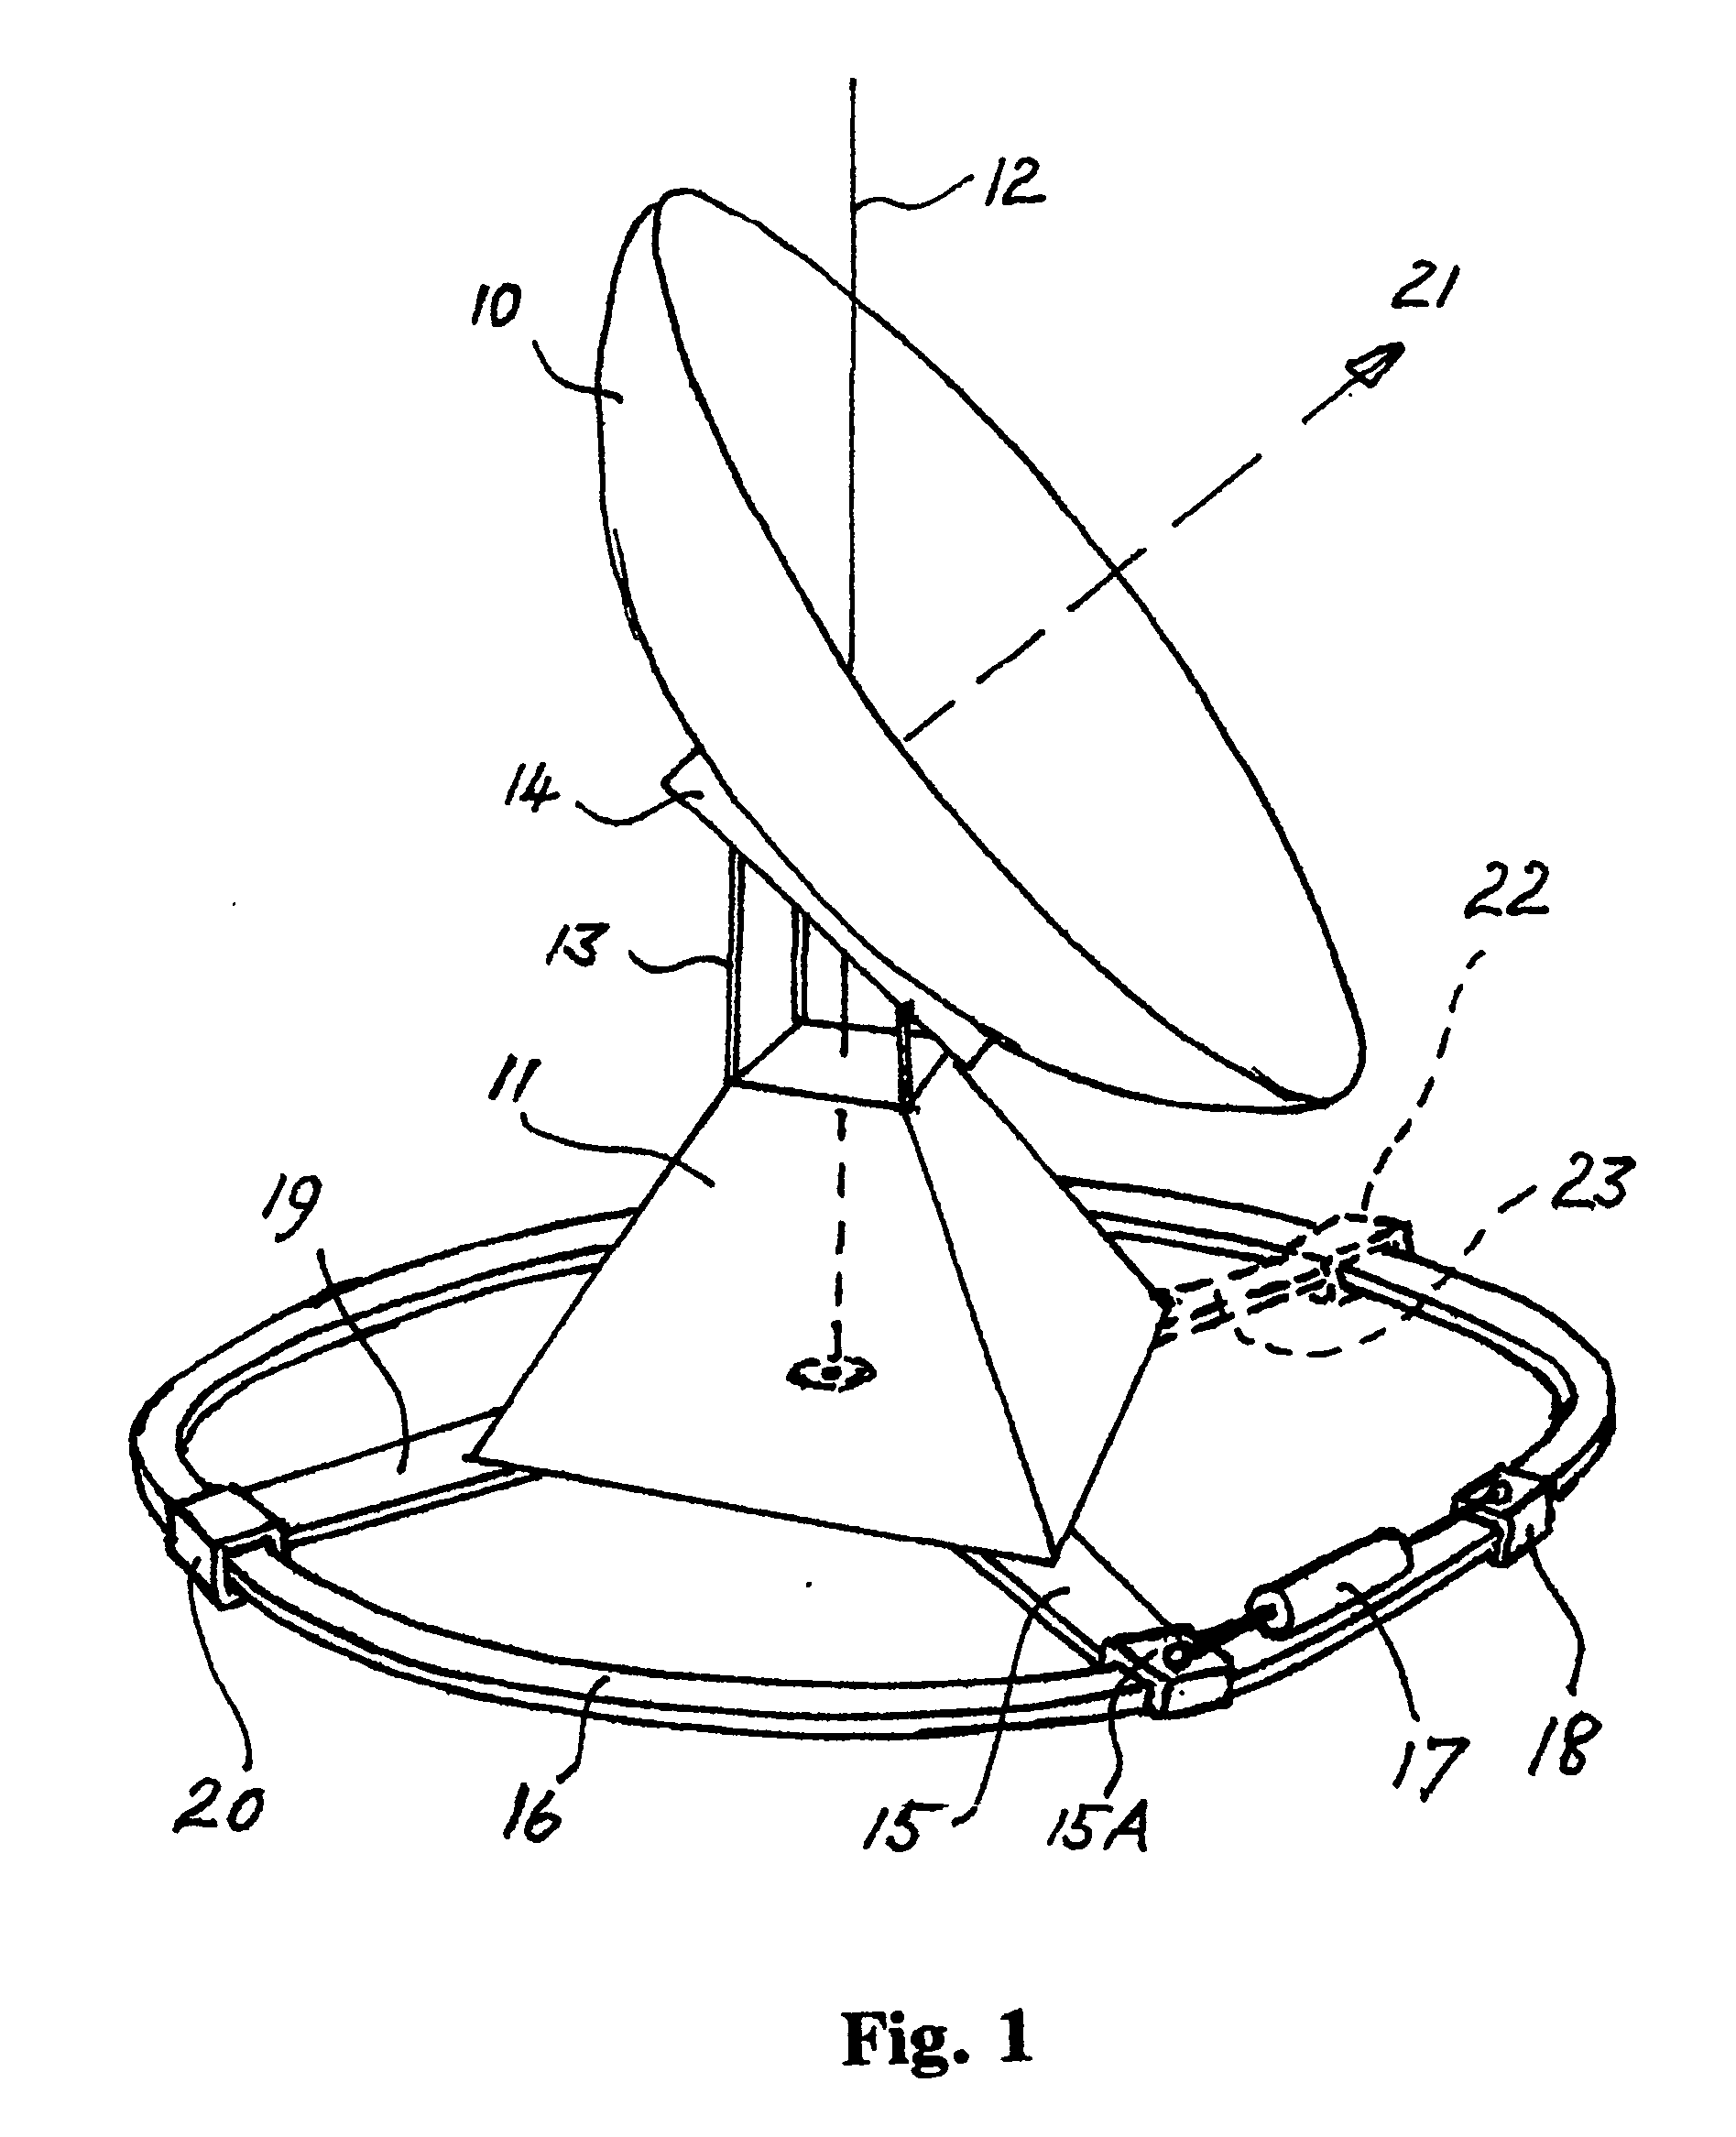 Apparatus for rotation of a large body about an axis